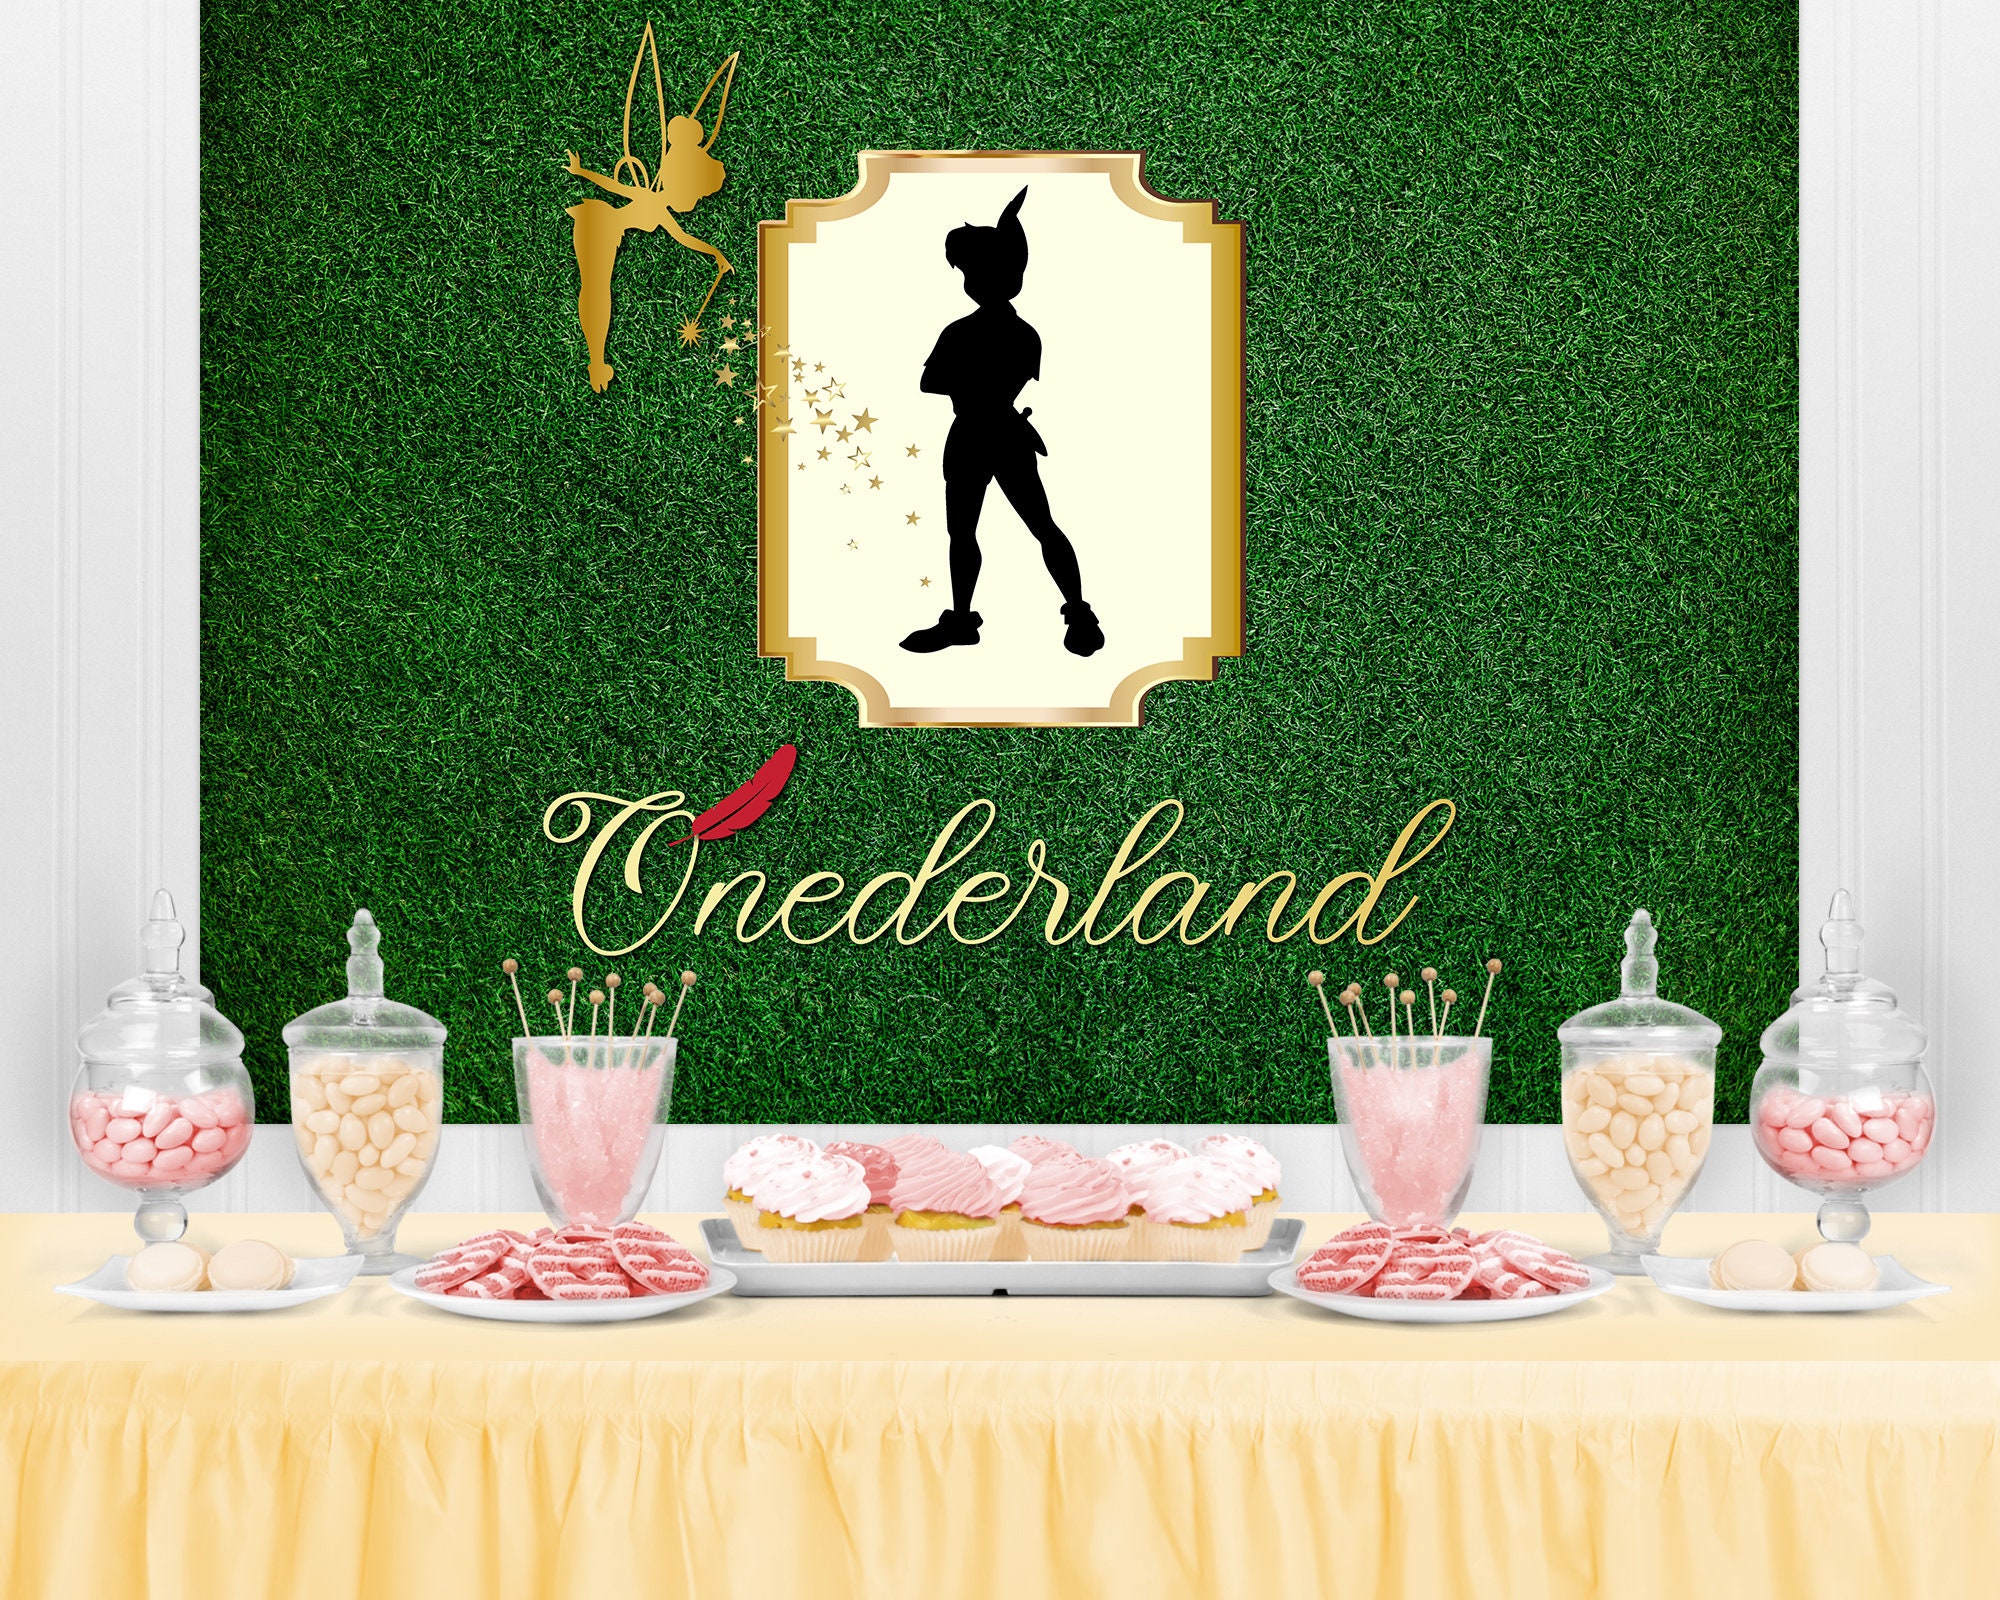 Neverland Birthday Party  Peter pan party, Boys 1st birthday party ideas,  Onederland birthday party